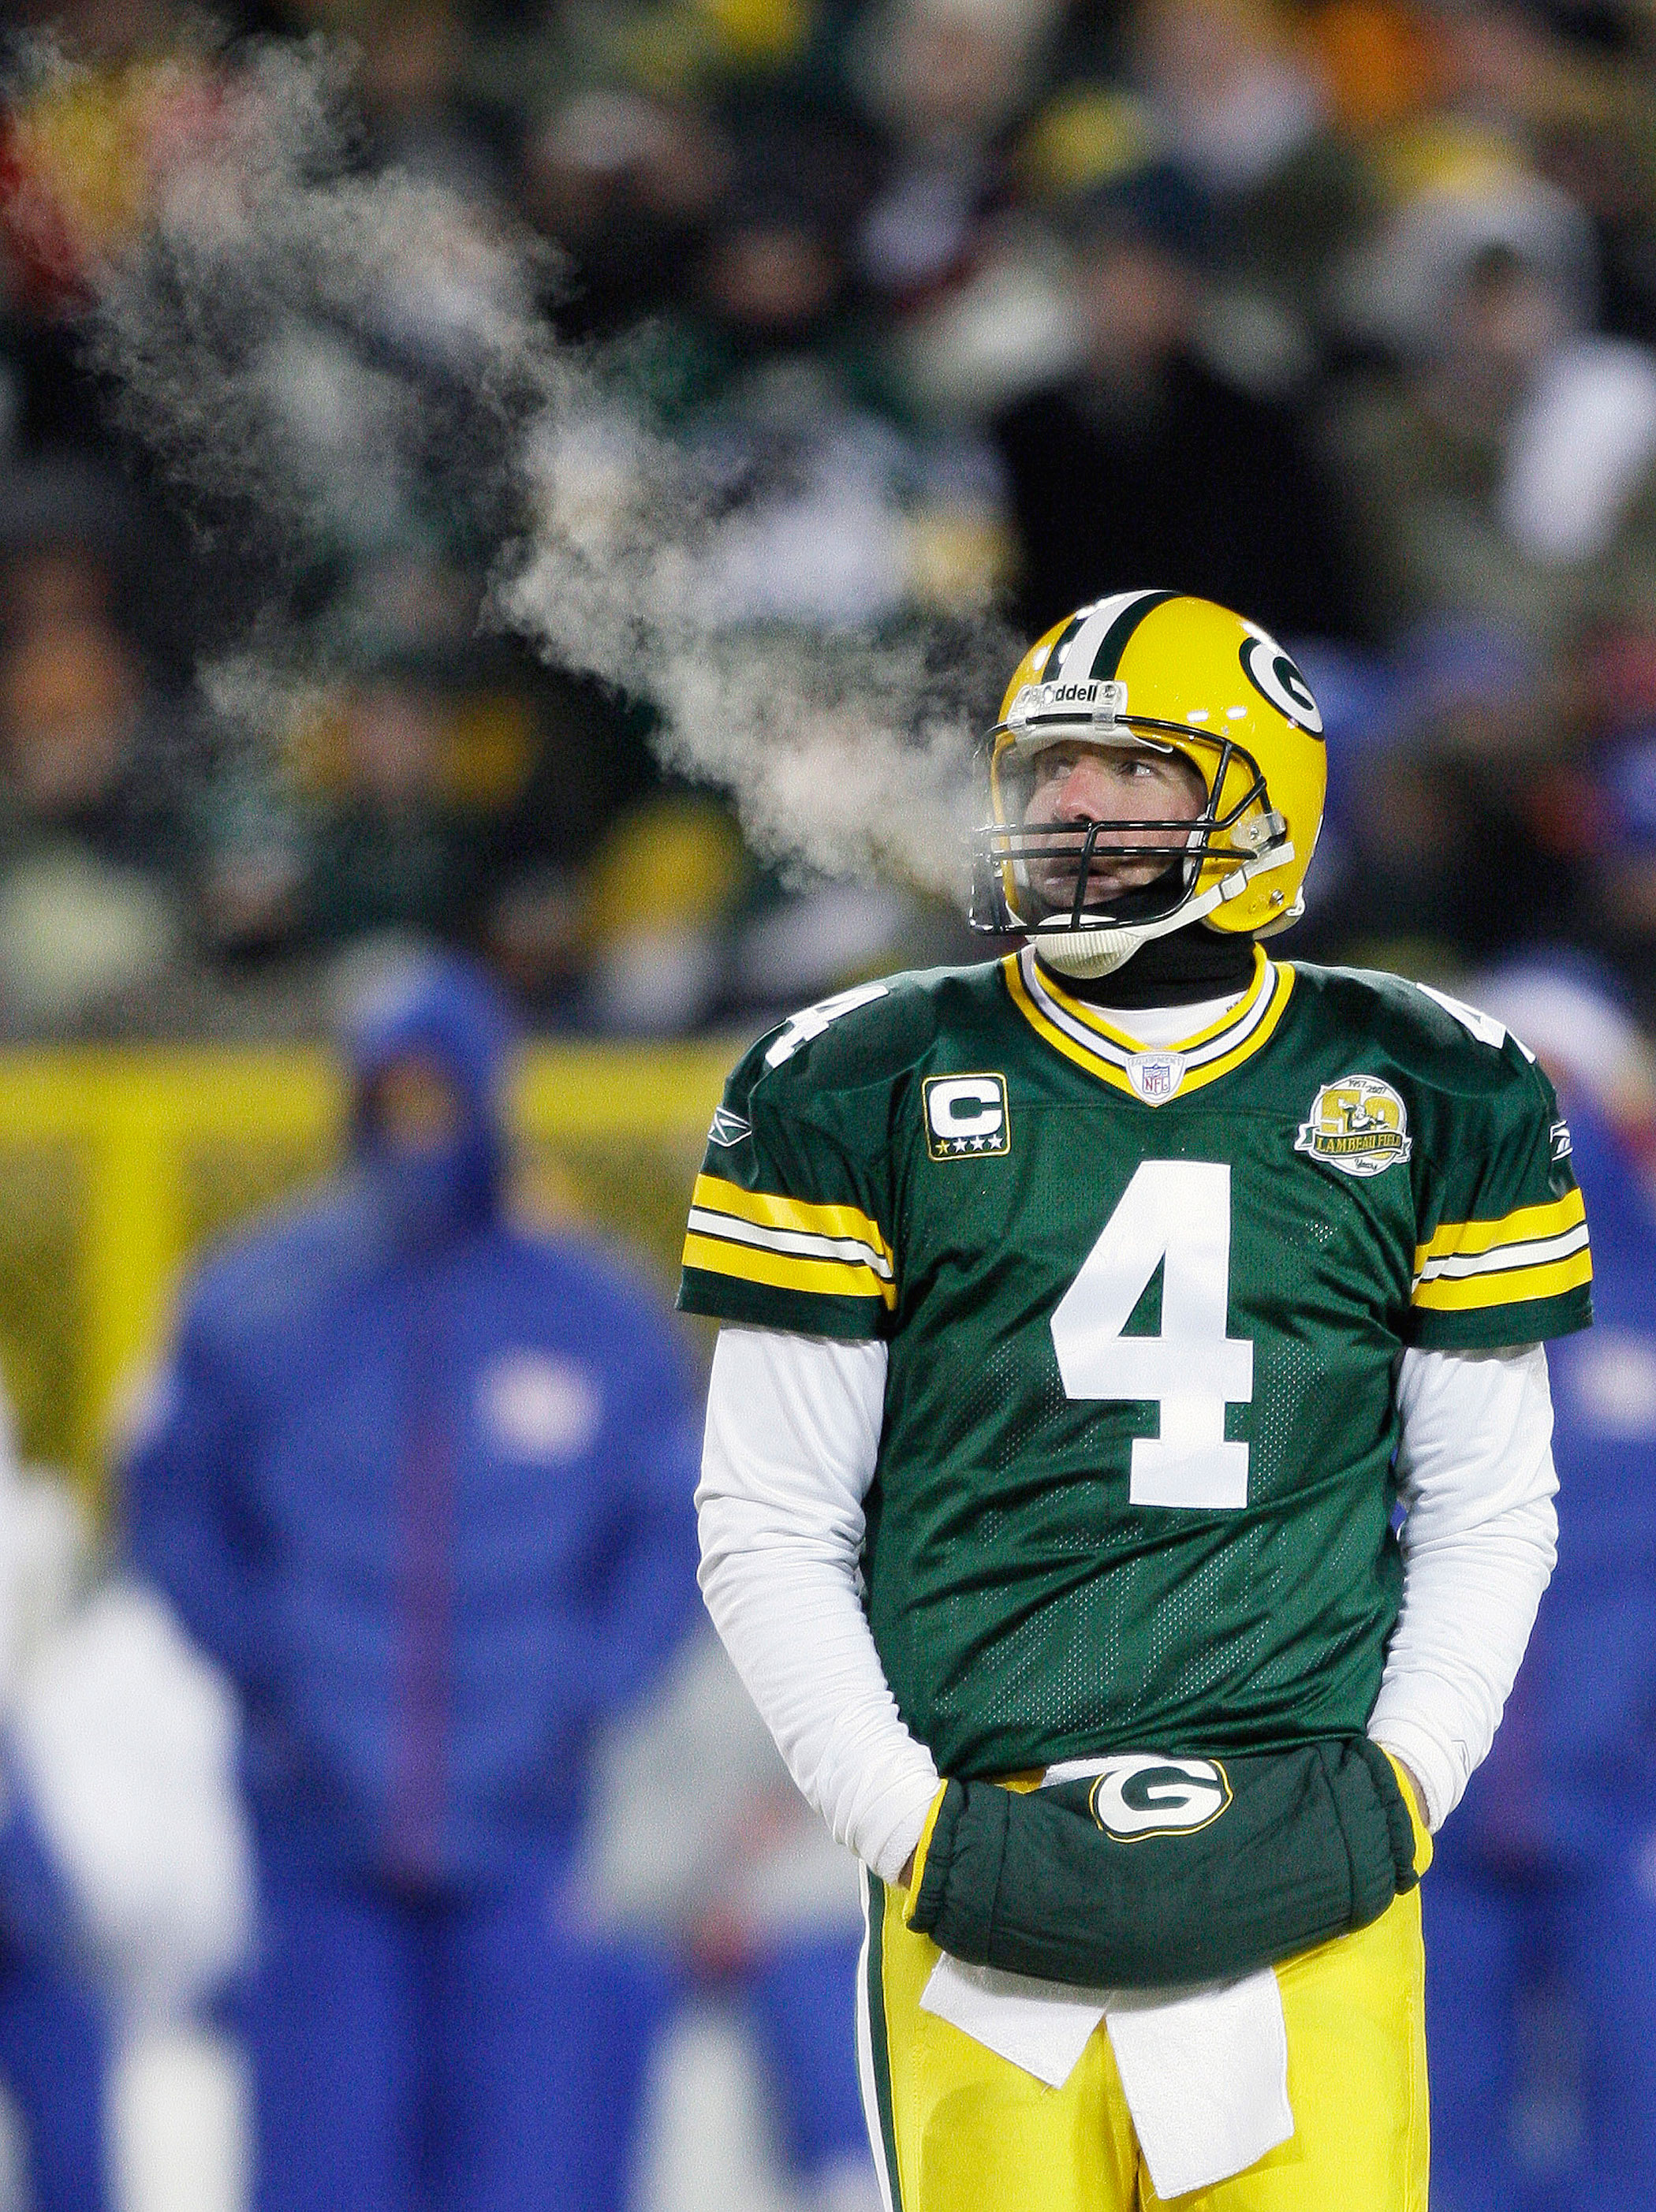 Temperature: -4°F (Wind Chill: -24°F). On Jan. 20, 2008, the Green Bay Packers faced the New York Giants in a frigid NFC championship football game. Here, Packers quarterback Brett Favre warms his hands at Lambeau Field in Green Bay, Wis.